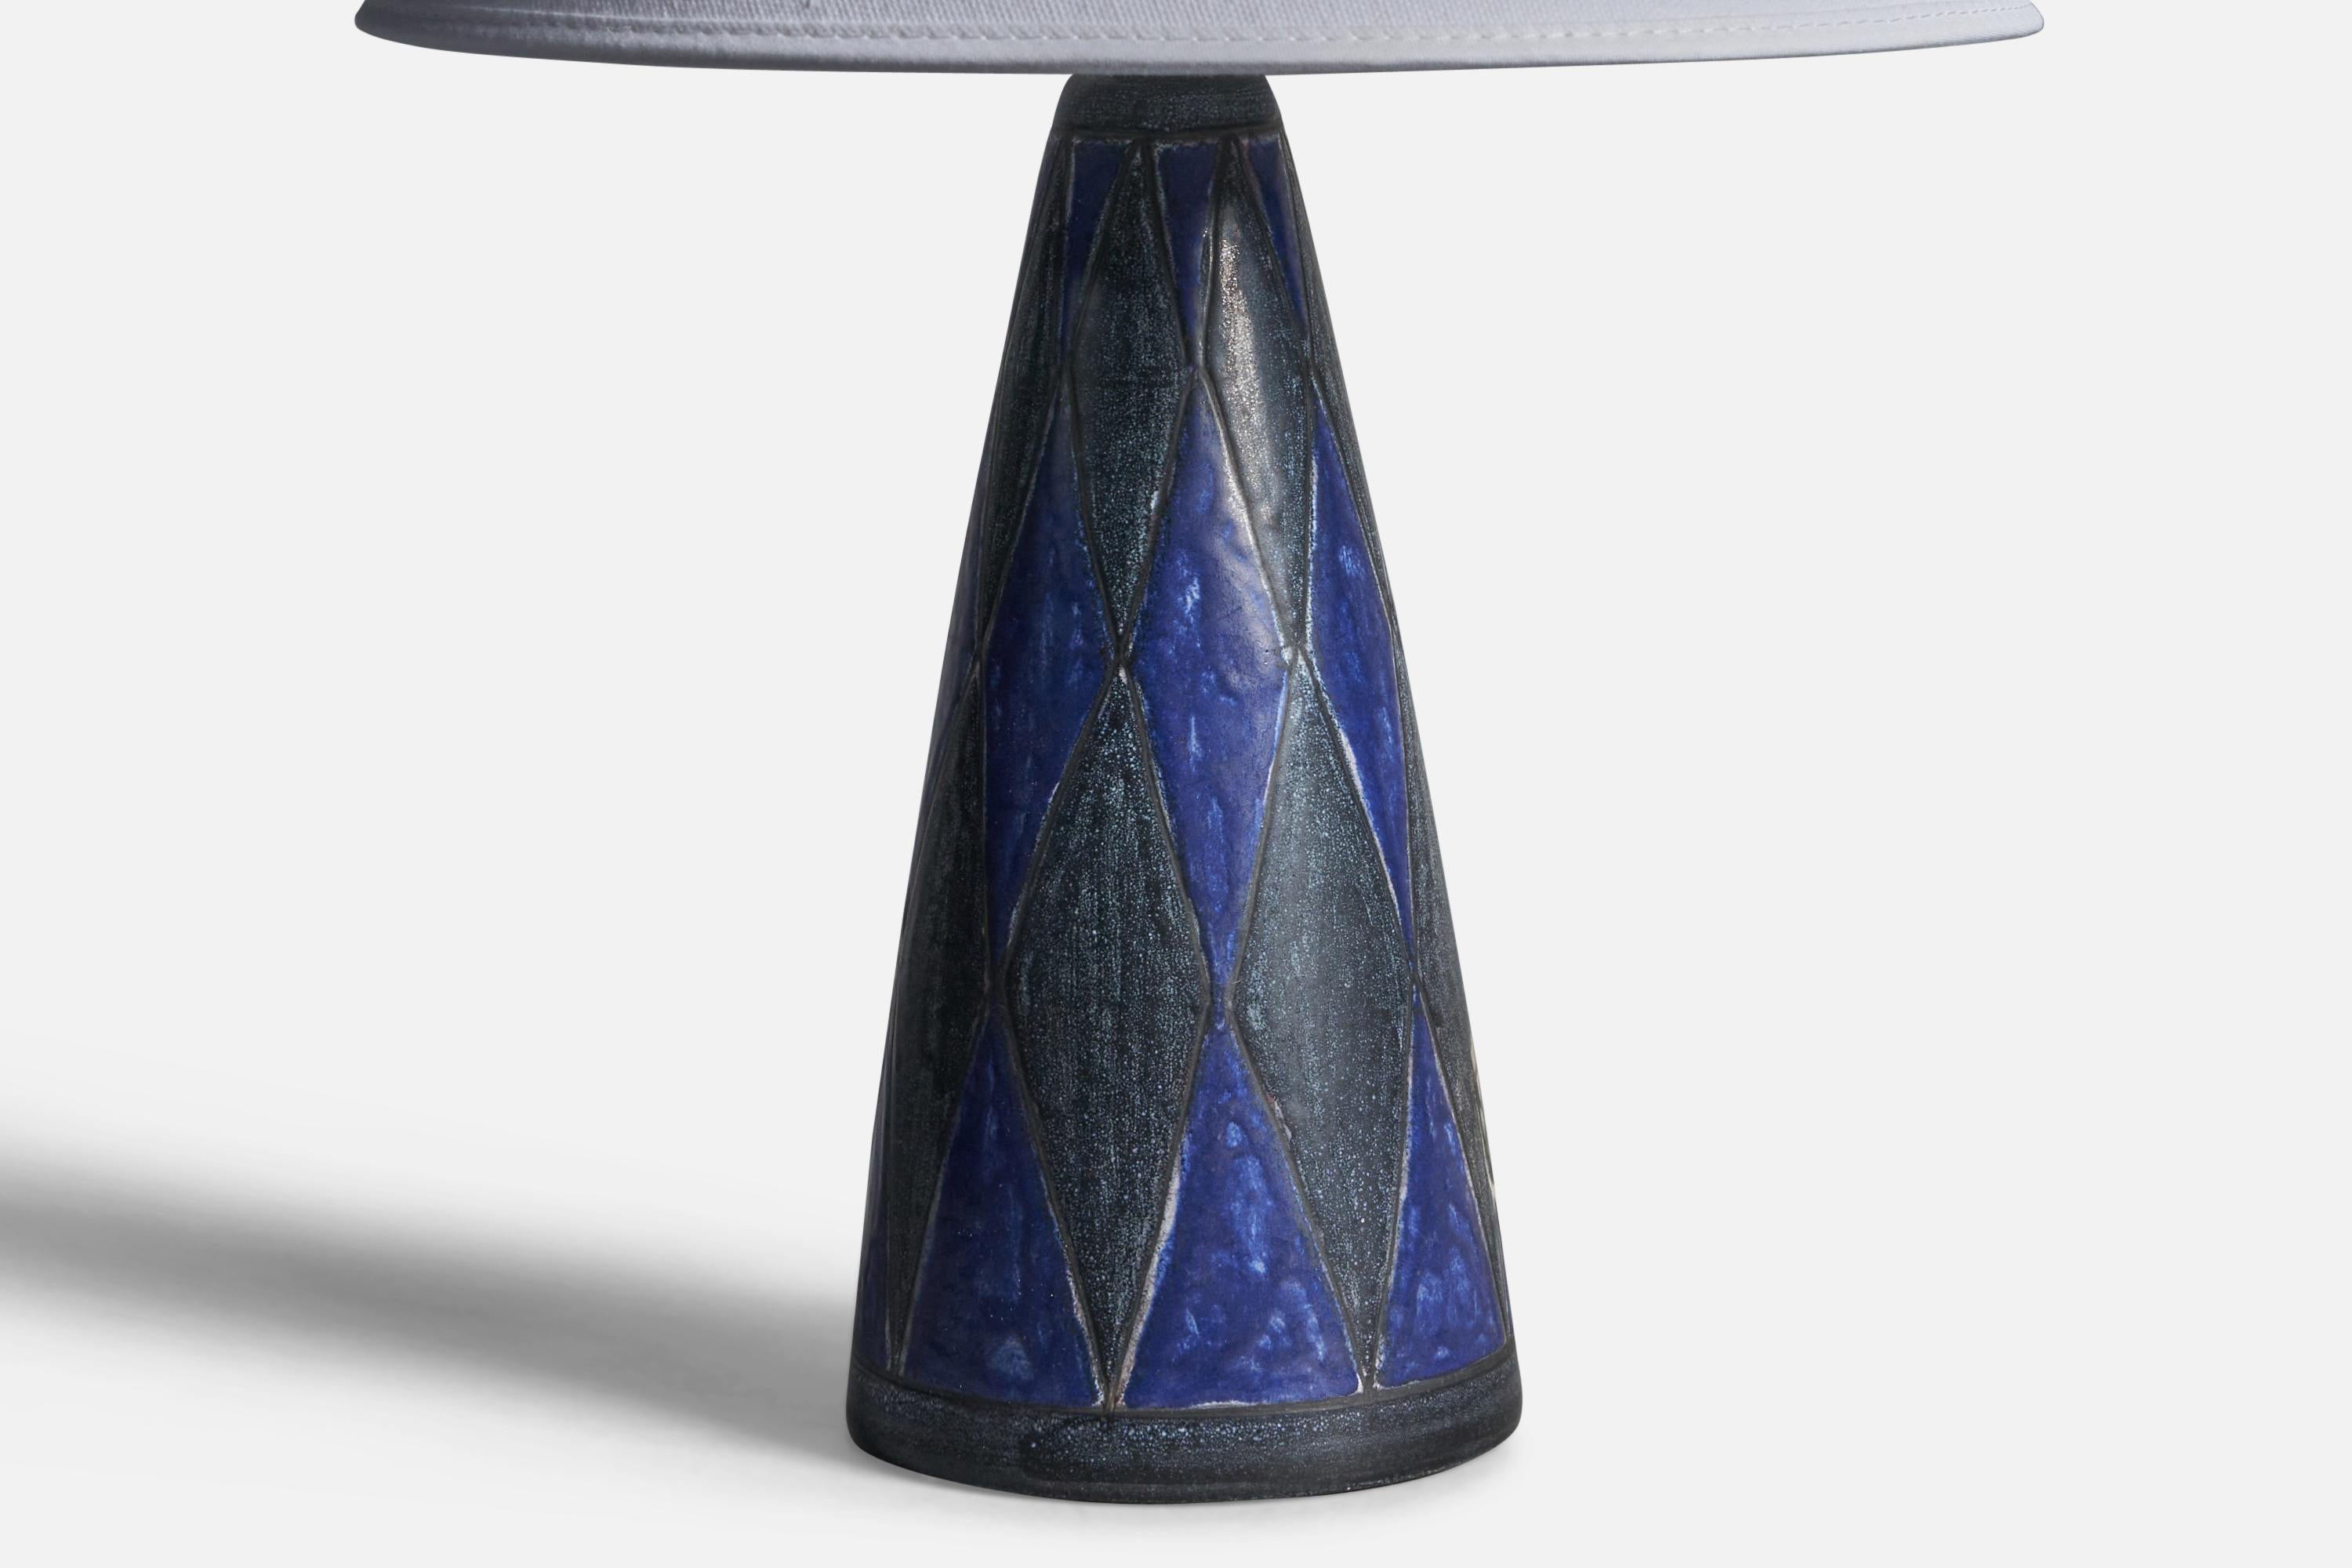 A blue-glazed stoneware table lamp designed by Marianne Starck and produced by Michael Andersen, Bornholm, Denmark, 1960s.

Dimensions of Lamp (inches): 10.75